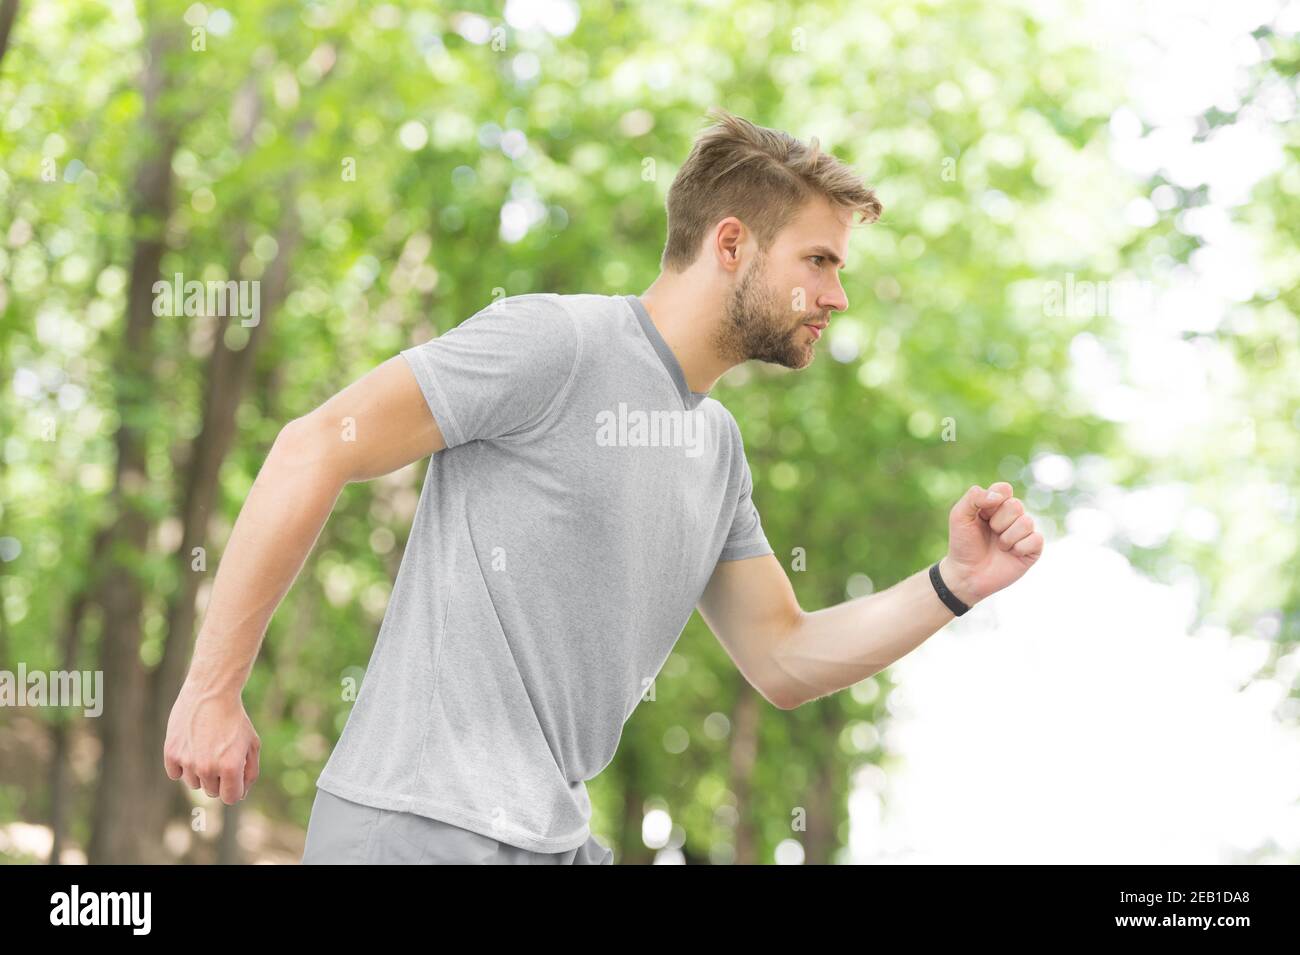 Moving to his goal. Man confident young running in park, side view. Sportsman ambitiously moves to achieve sport goal. Masculinity and sport achievements concept. Guy concentrated runs for his goal. Stock Photo